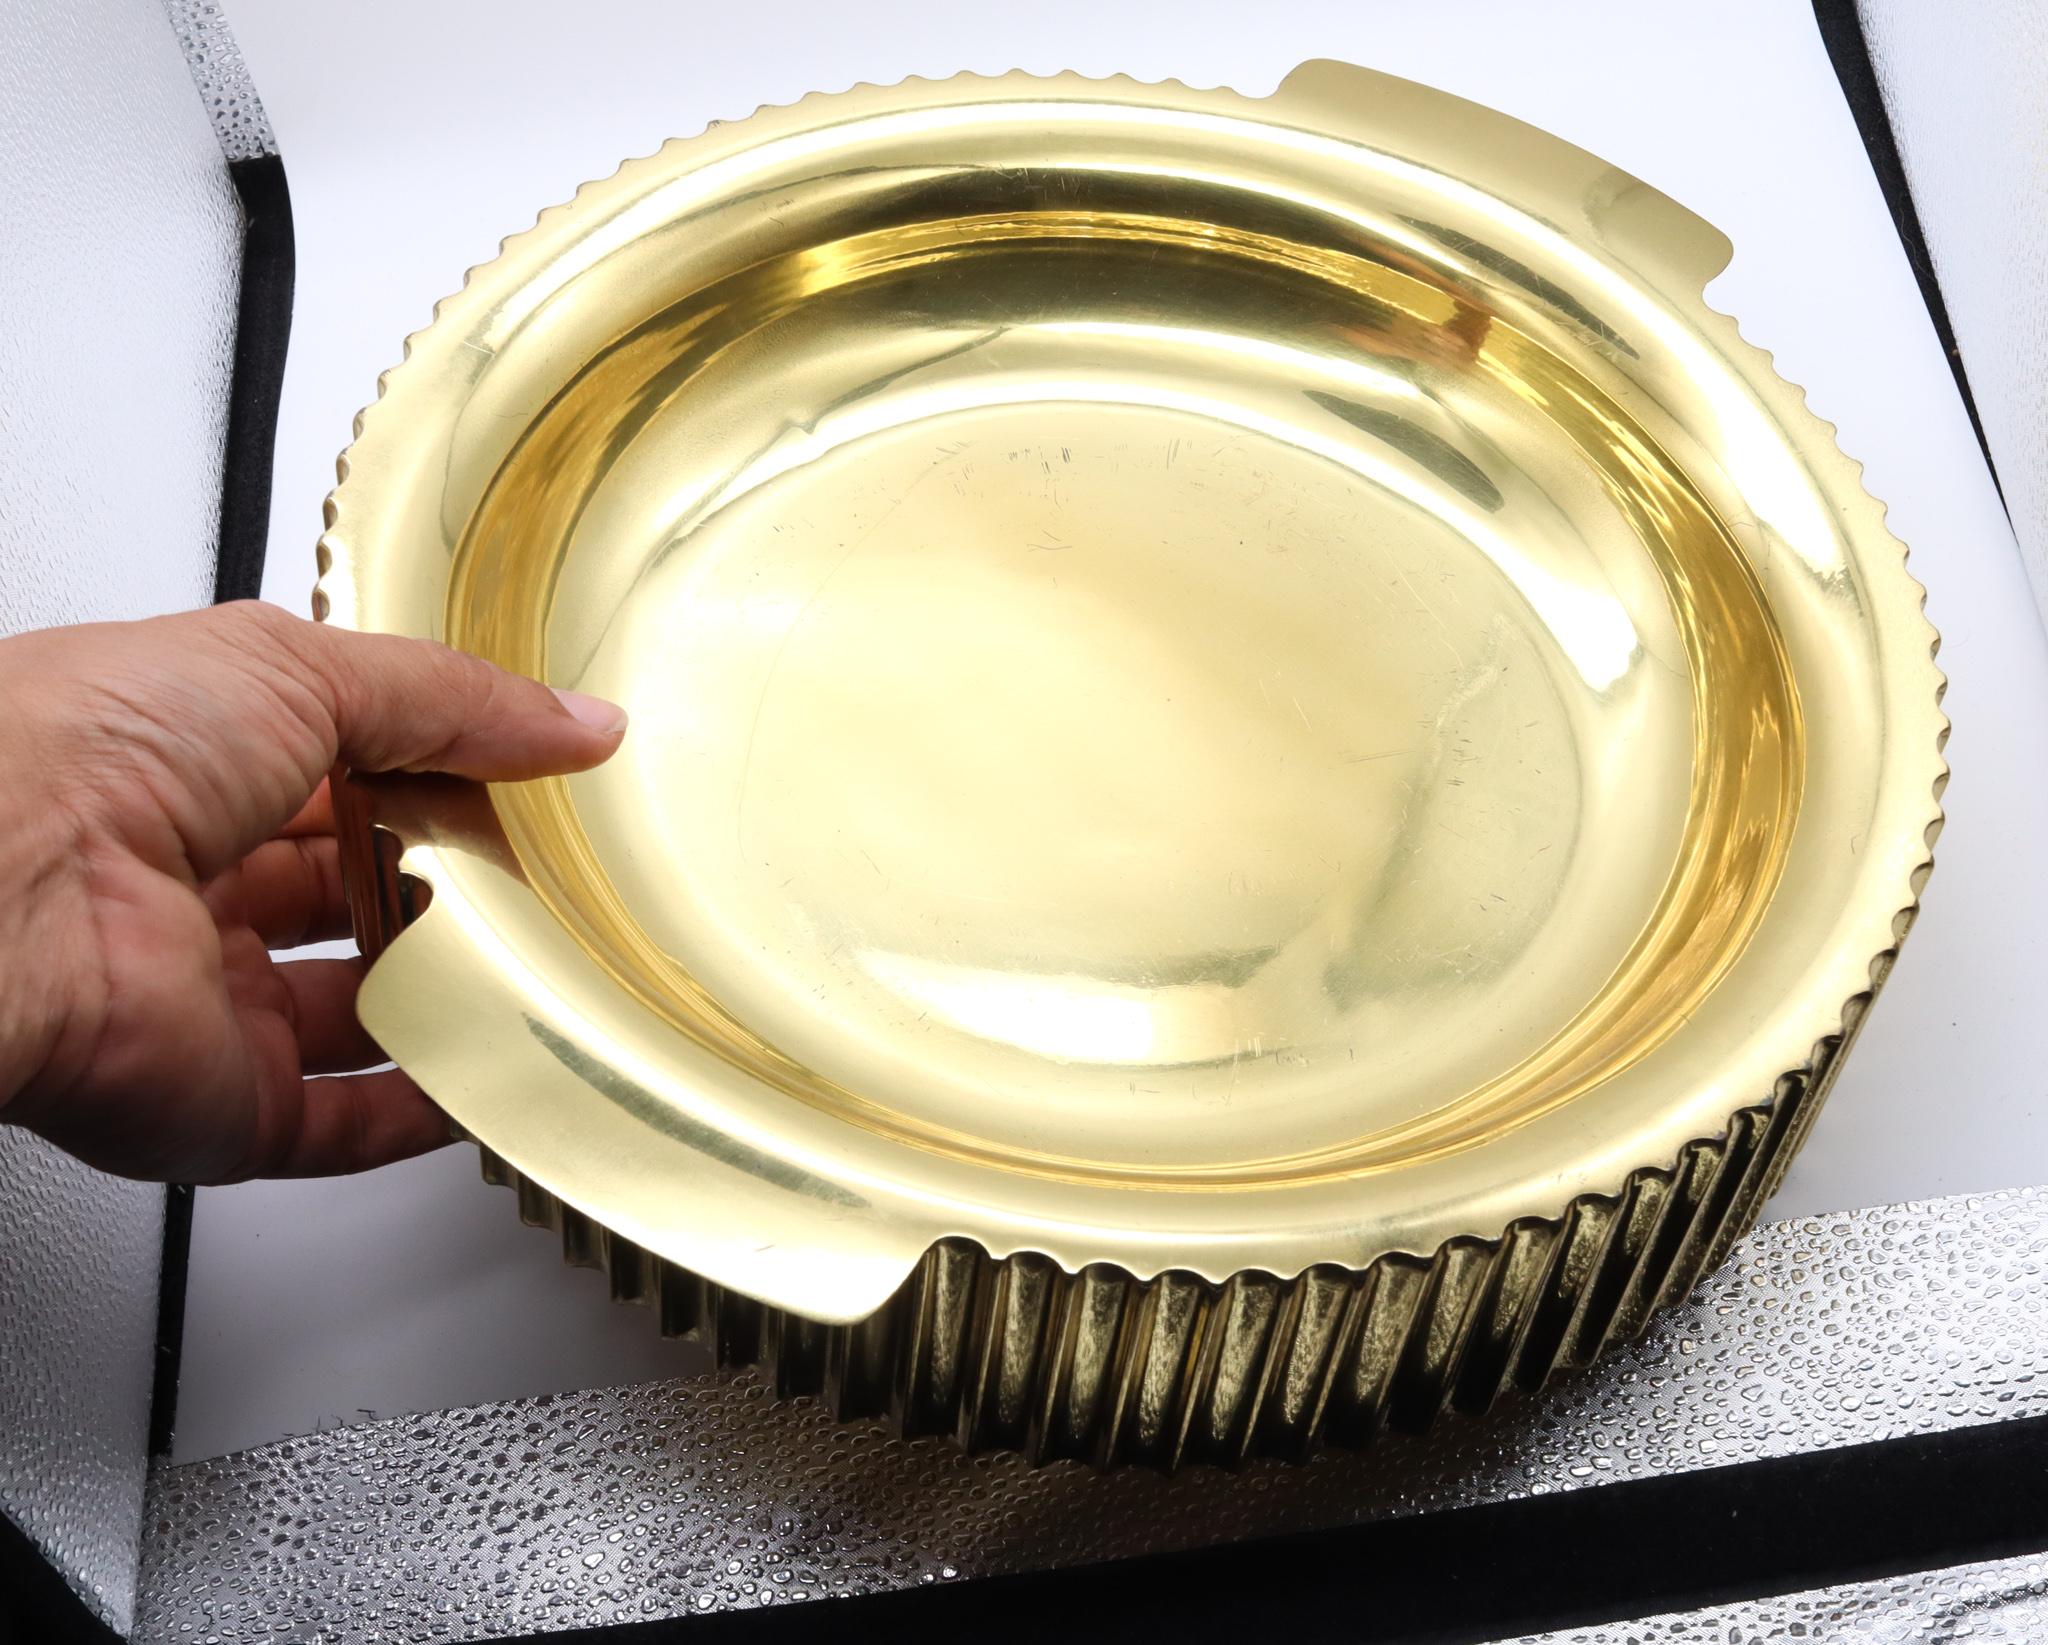 Italian art deco fluted tray in bronze.

An statement decorative piece made in Milan, Italy after the war, circa 1950. This Italian-deco tray was crafted with scalloped fluted patterns in solid polished bronze, with two discrete handles at the